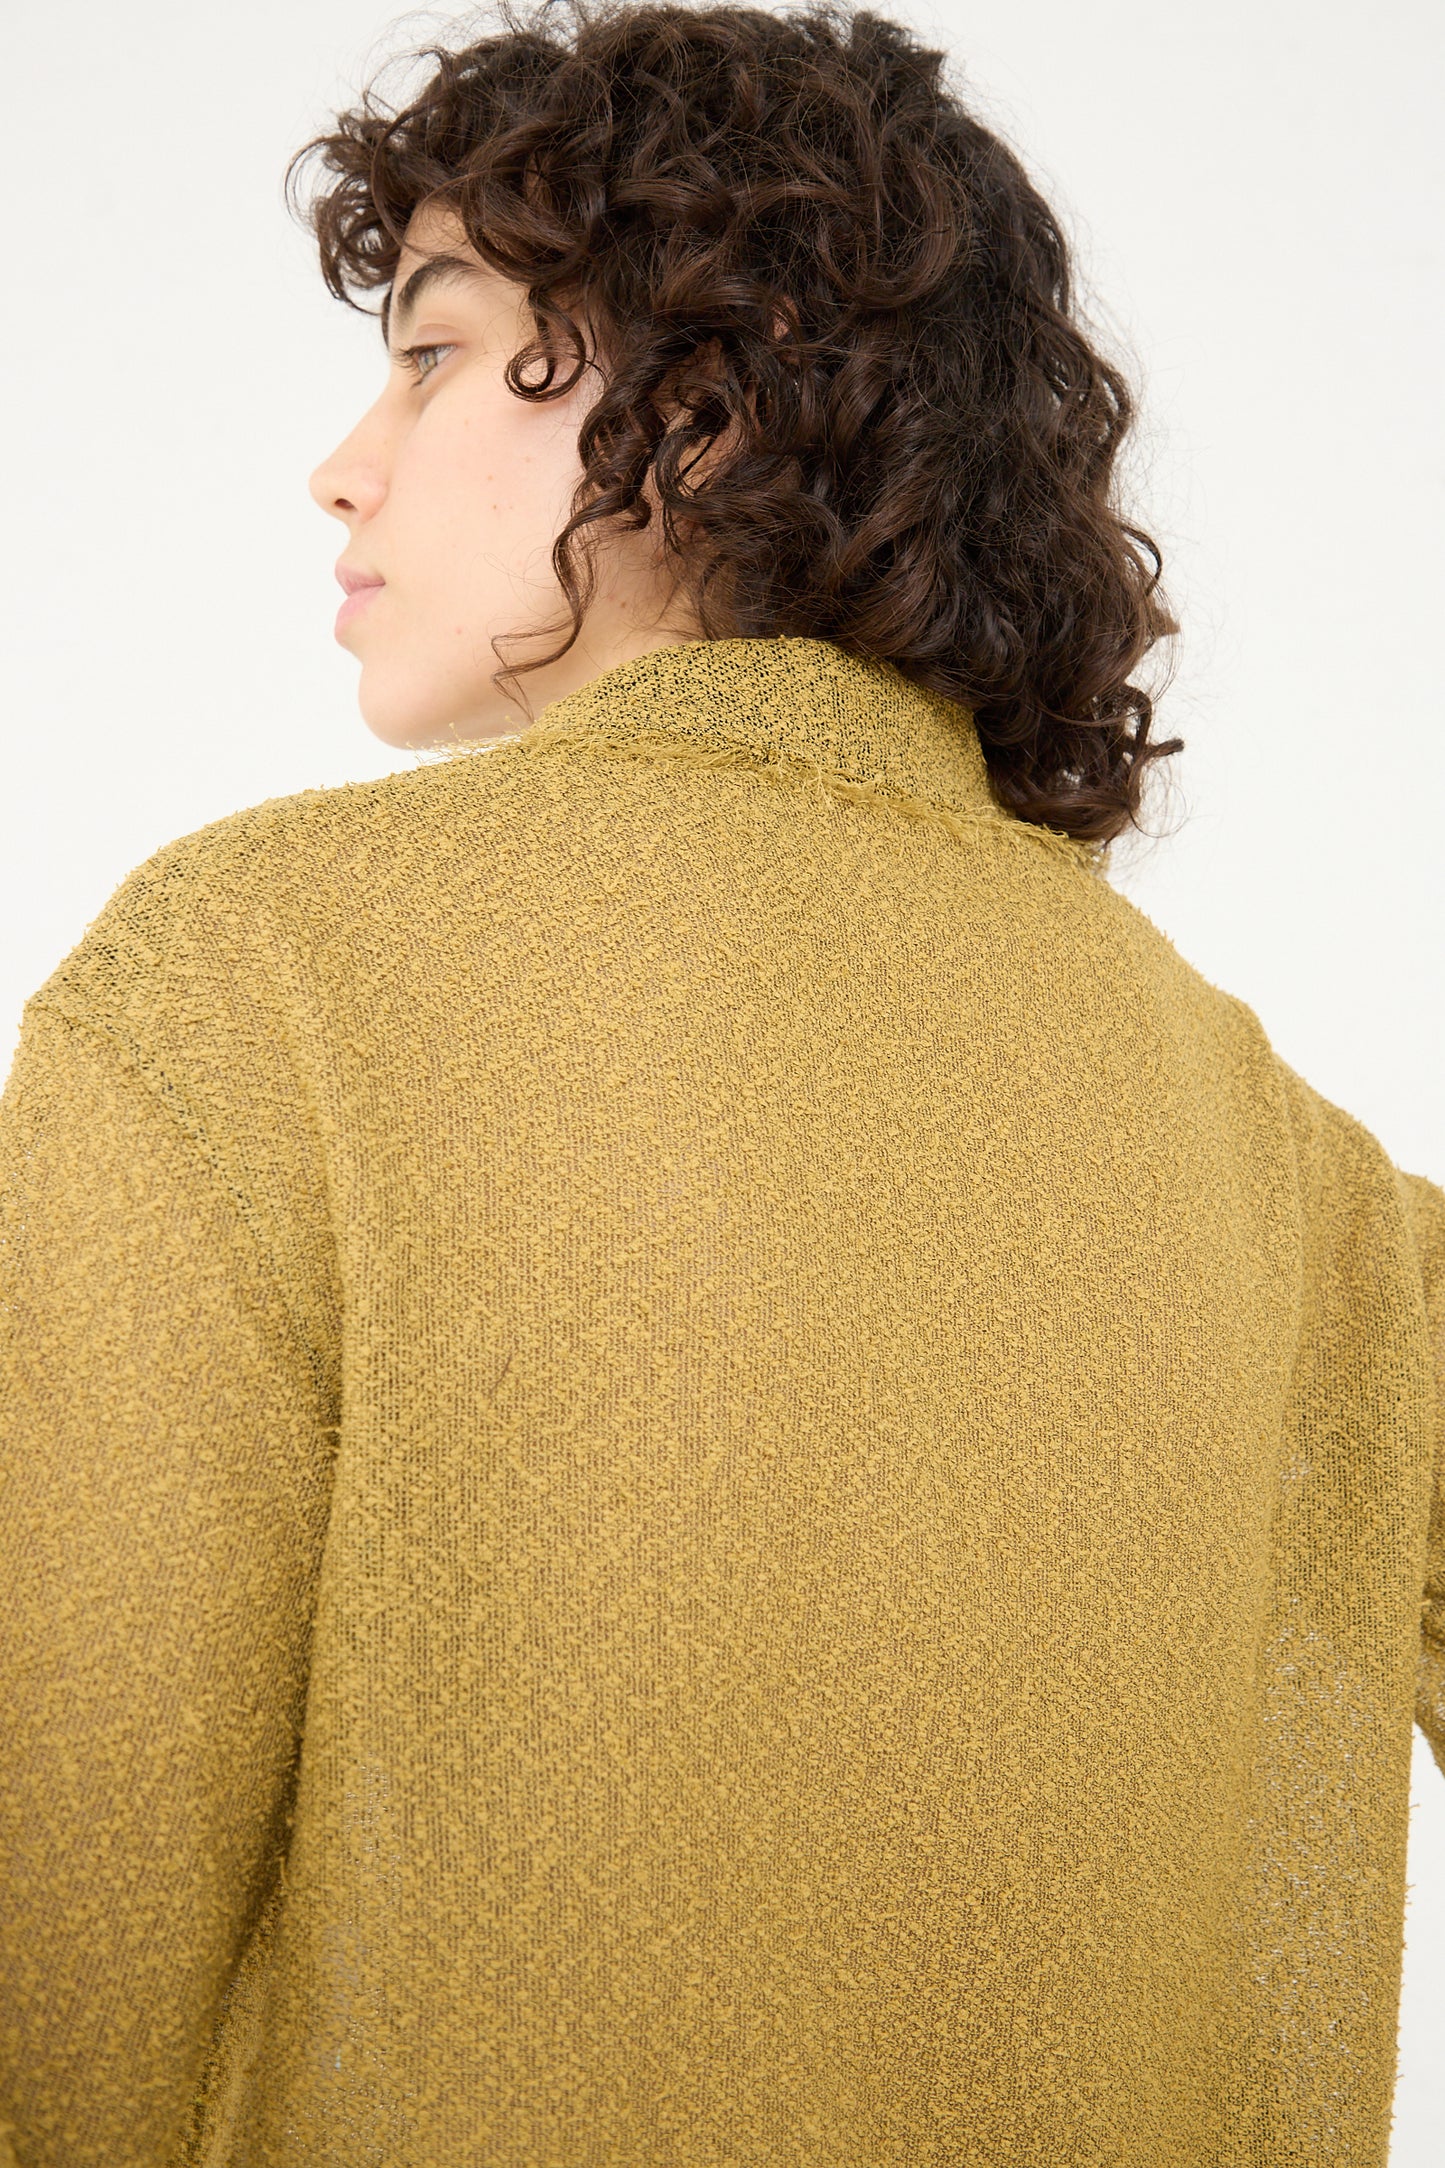 The back view of a woman wearing a Tweed Blouse in Cumin by Veronique Leroy.